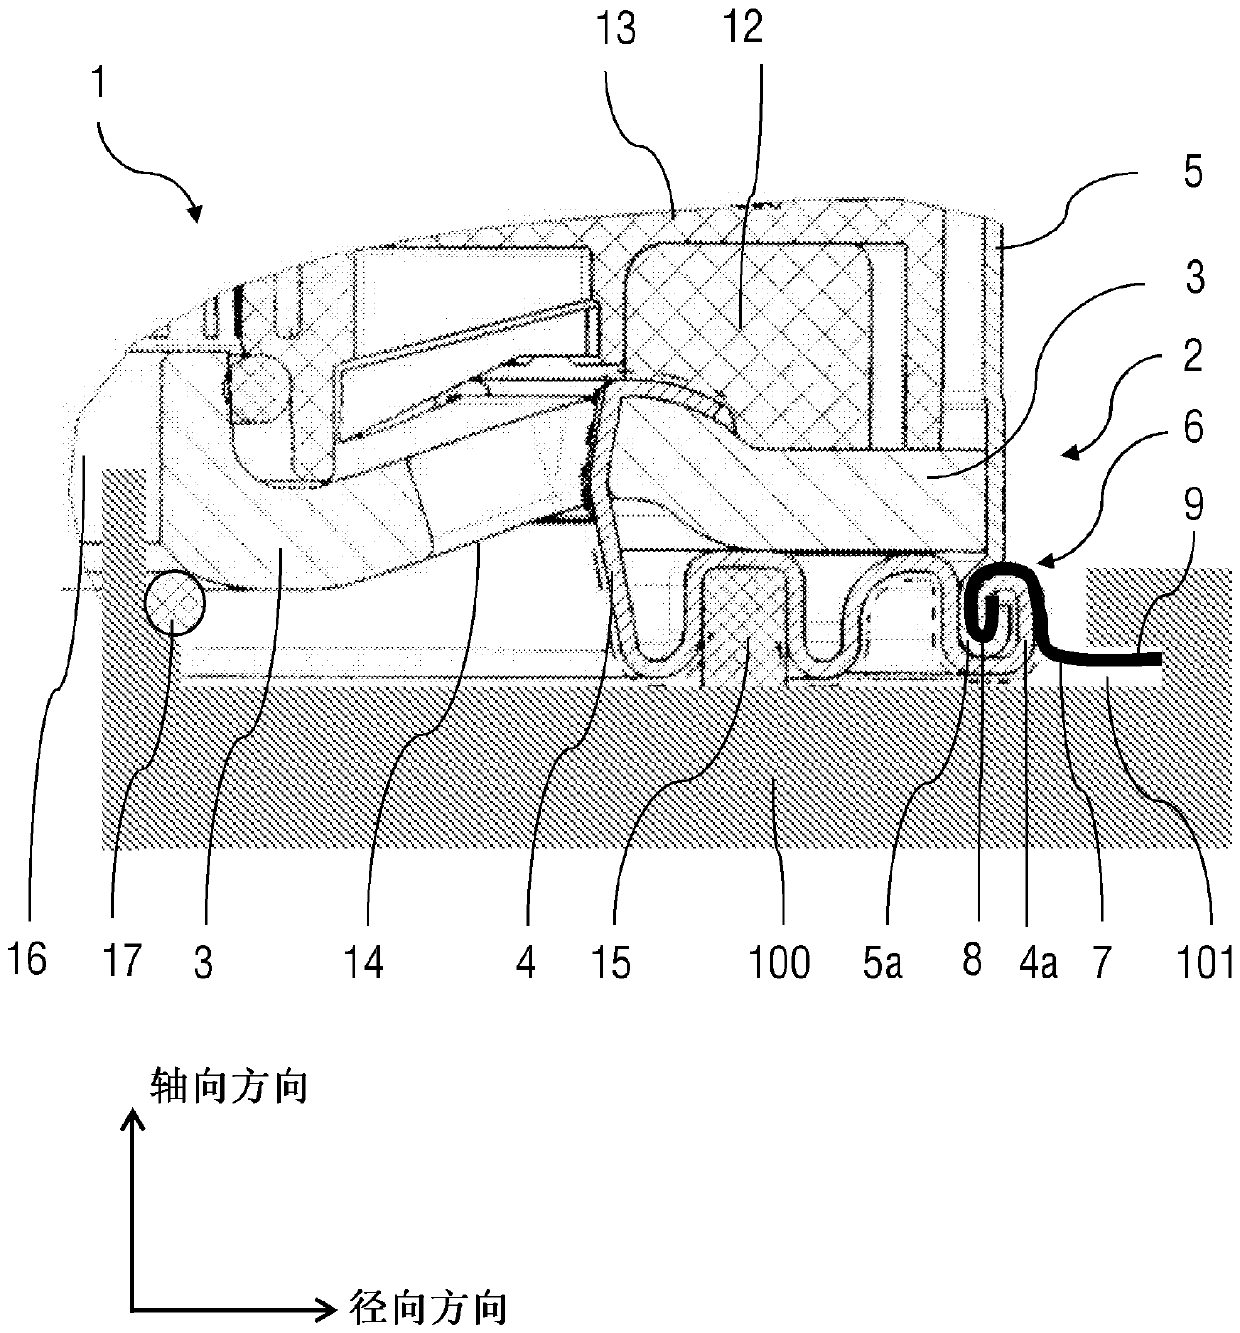 Device for loosely securing desiccant cartridges at housings of air preparation equipment